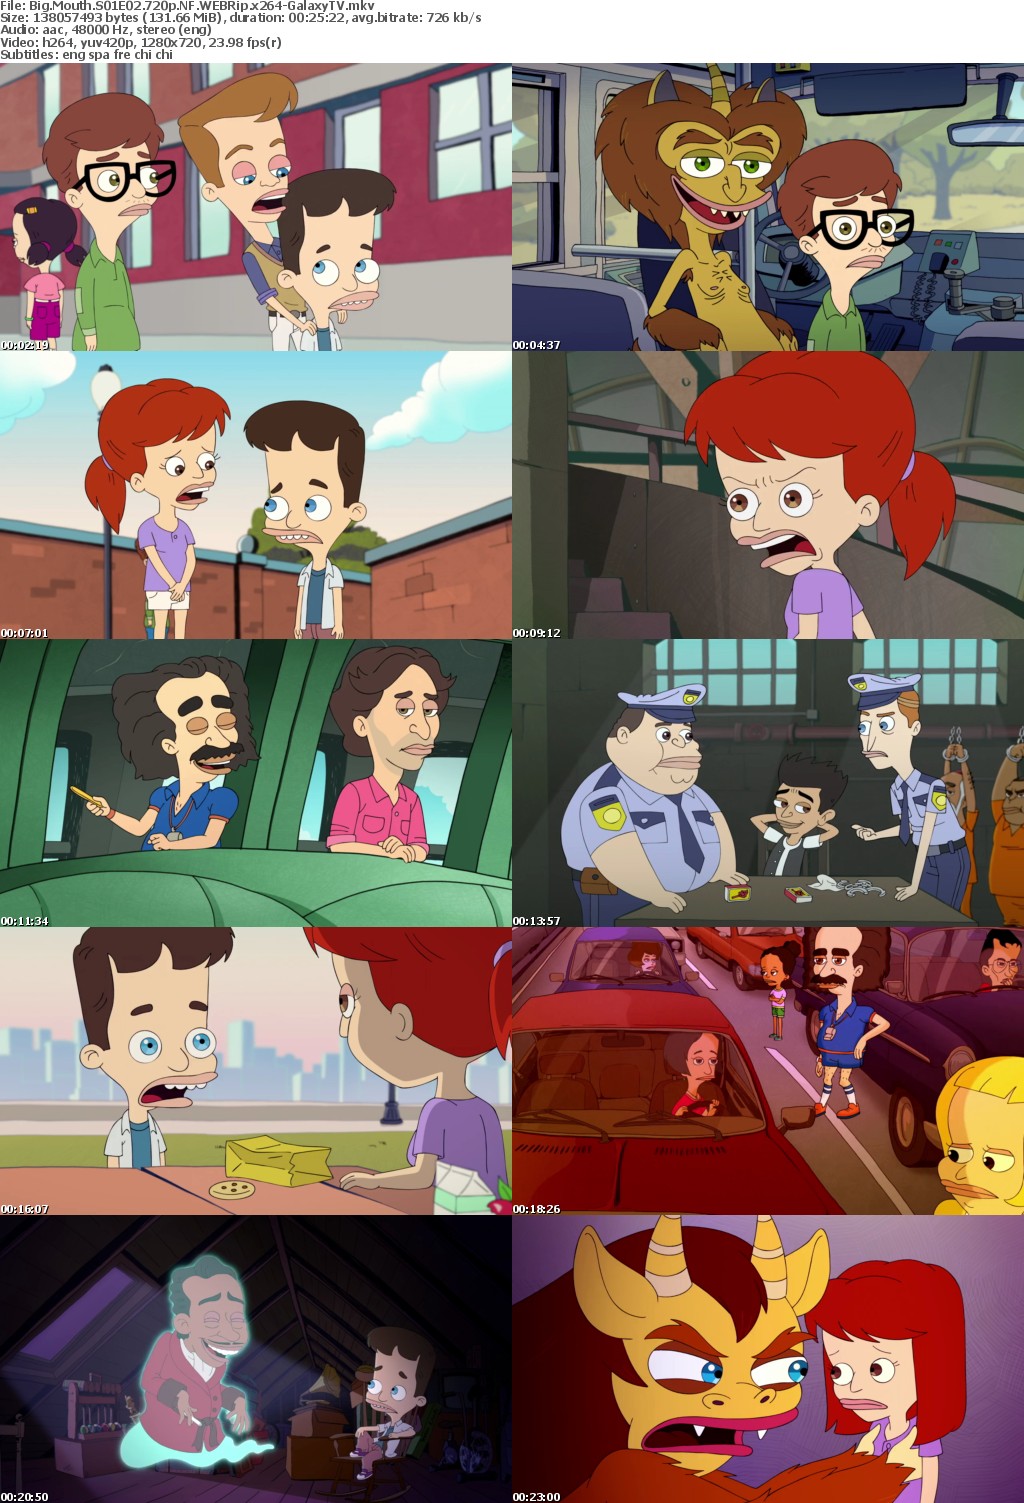 Big Mouth S01 COMPLETE 720p NF WEBRip x264-GalaxyTV